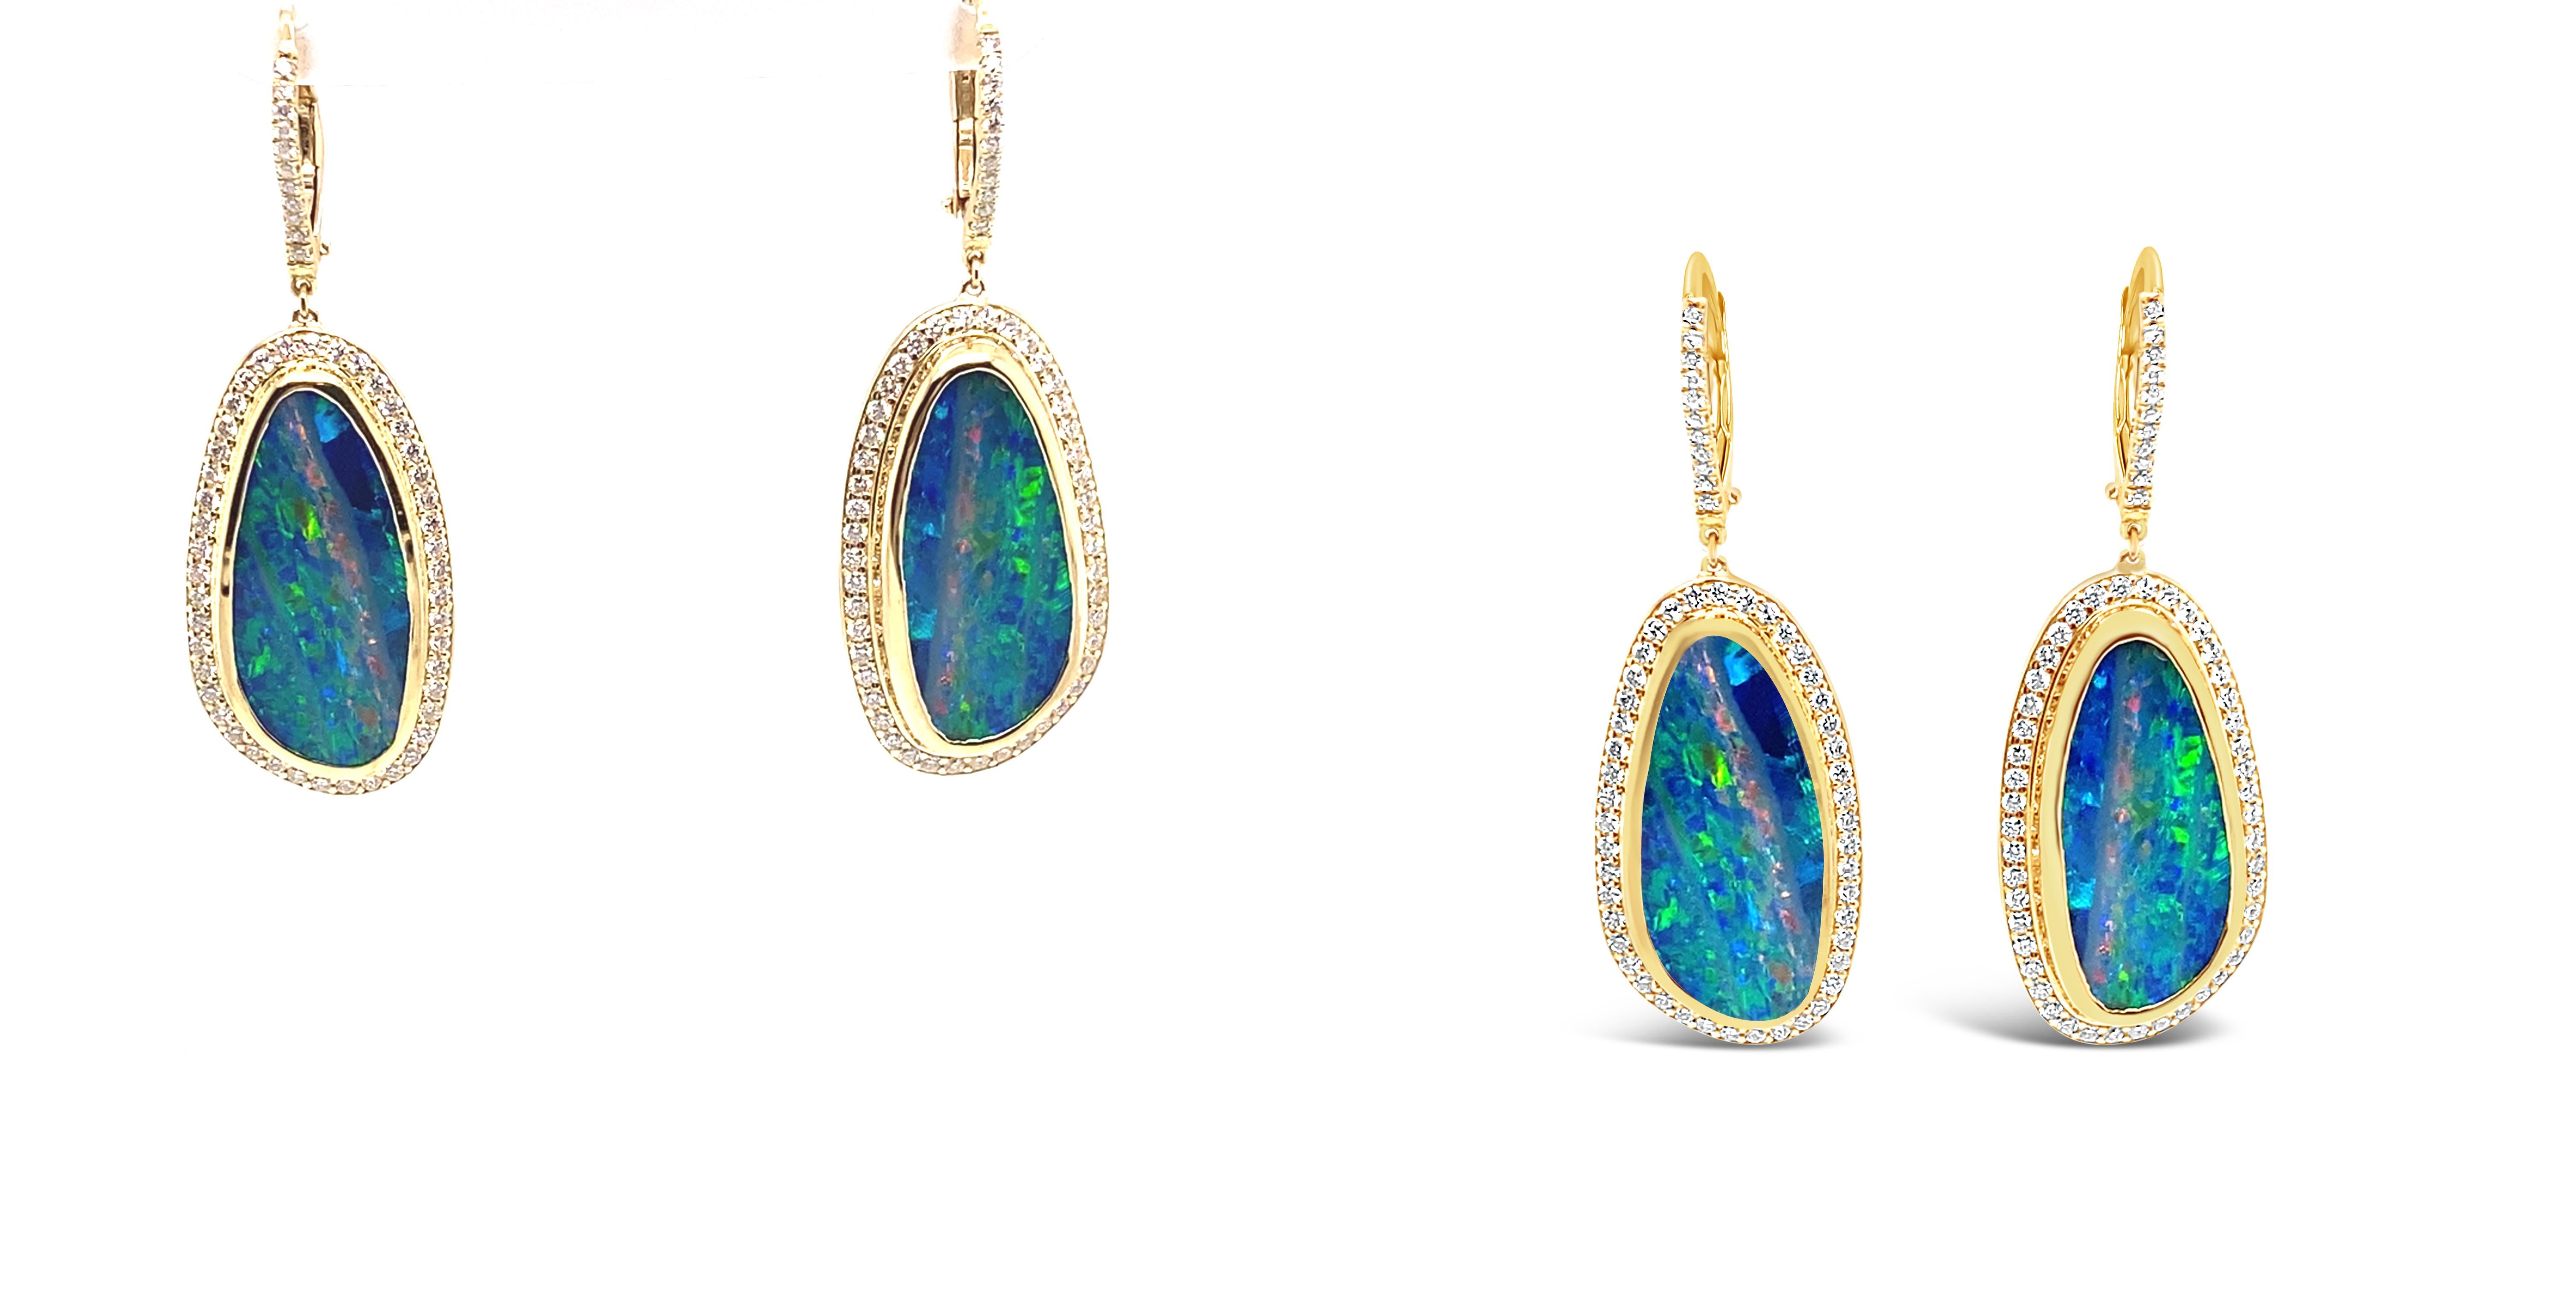 Stunning One of A Kind 18k Yellow Gold Australian Boulder Opal Diamond Earrings.

Hand Selected Pair of Boulder Opals that are rich with color, flash & light- their vivid green and blue color play dancing in a halo of scintillating